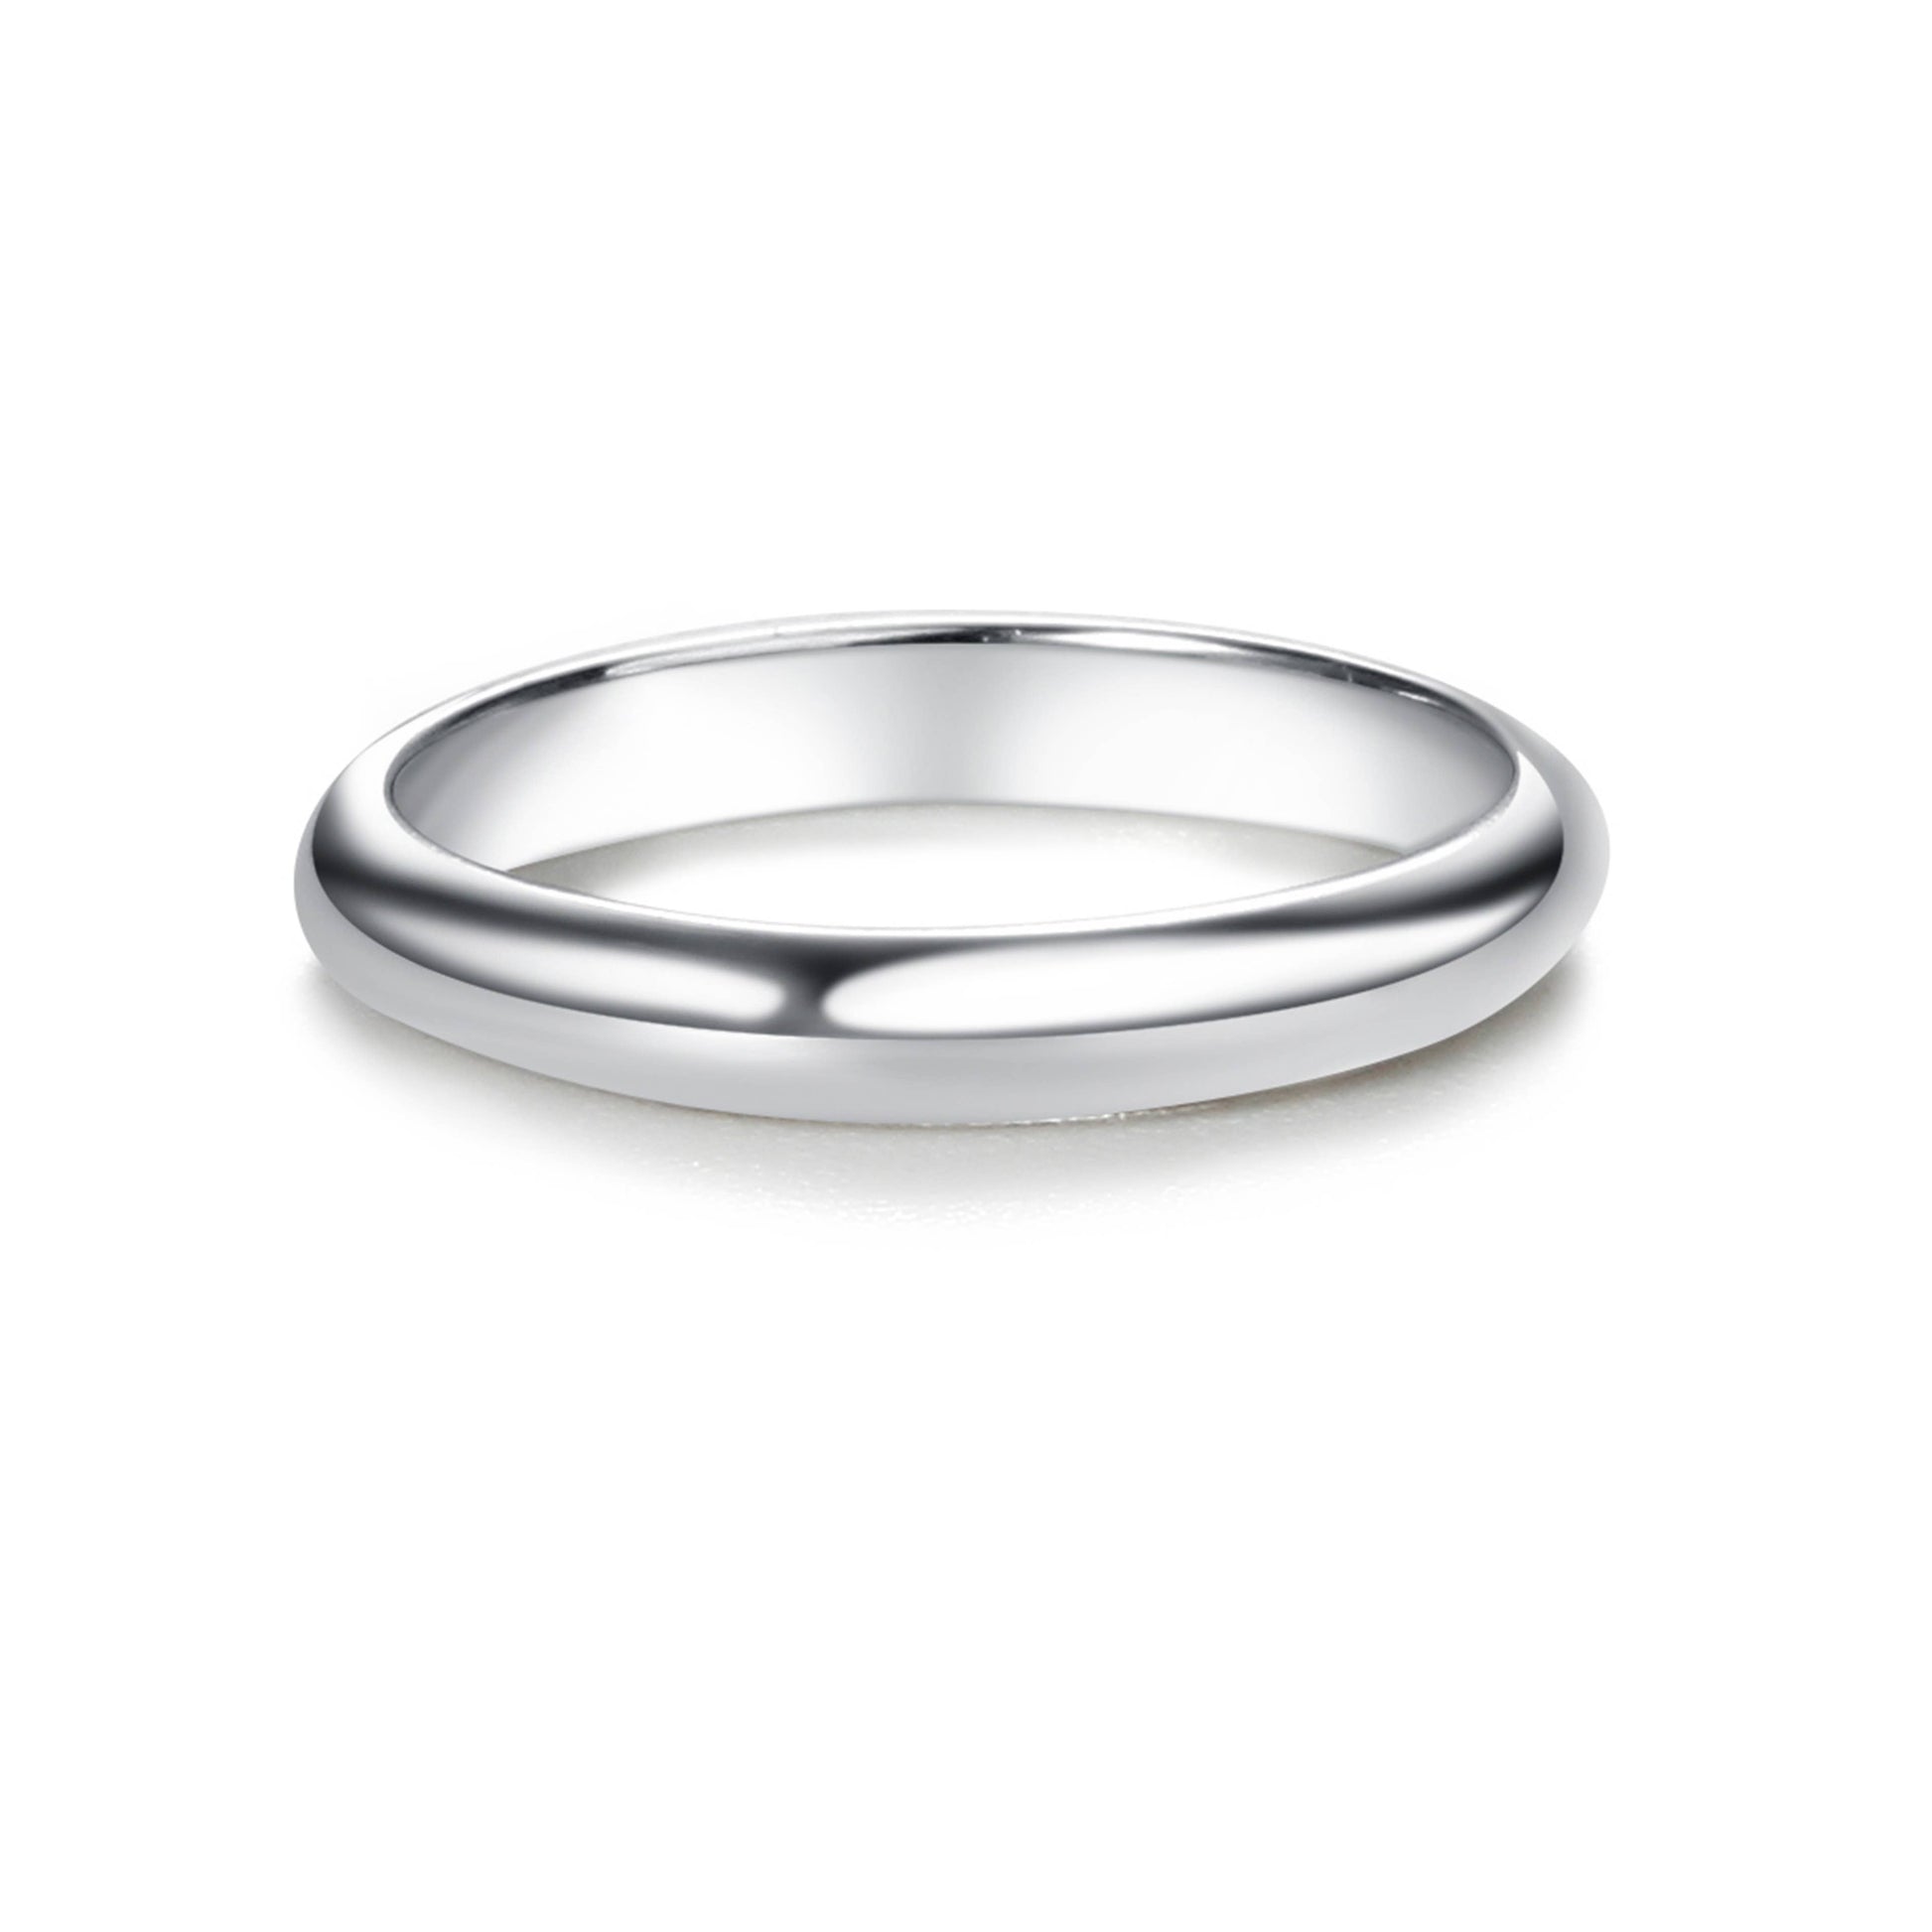 Sterling Silver Baby Ring - 2mm Silver Band for Baby & Kids size 1 Kids Jewelry Cherished Moments   